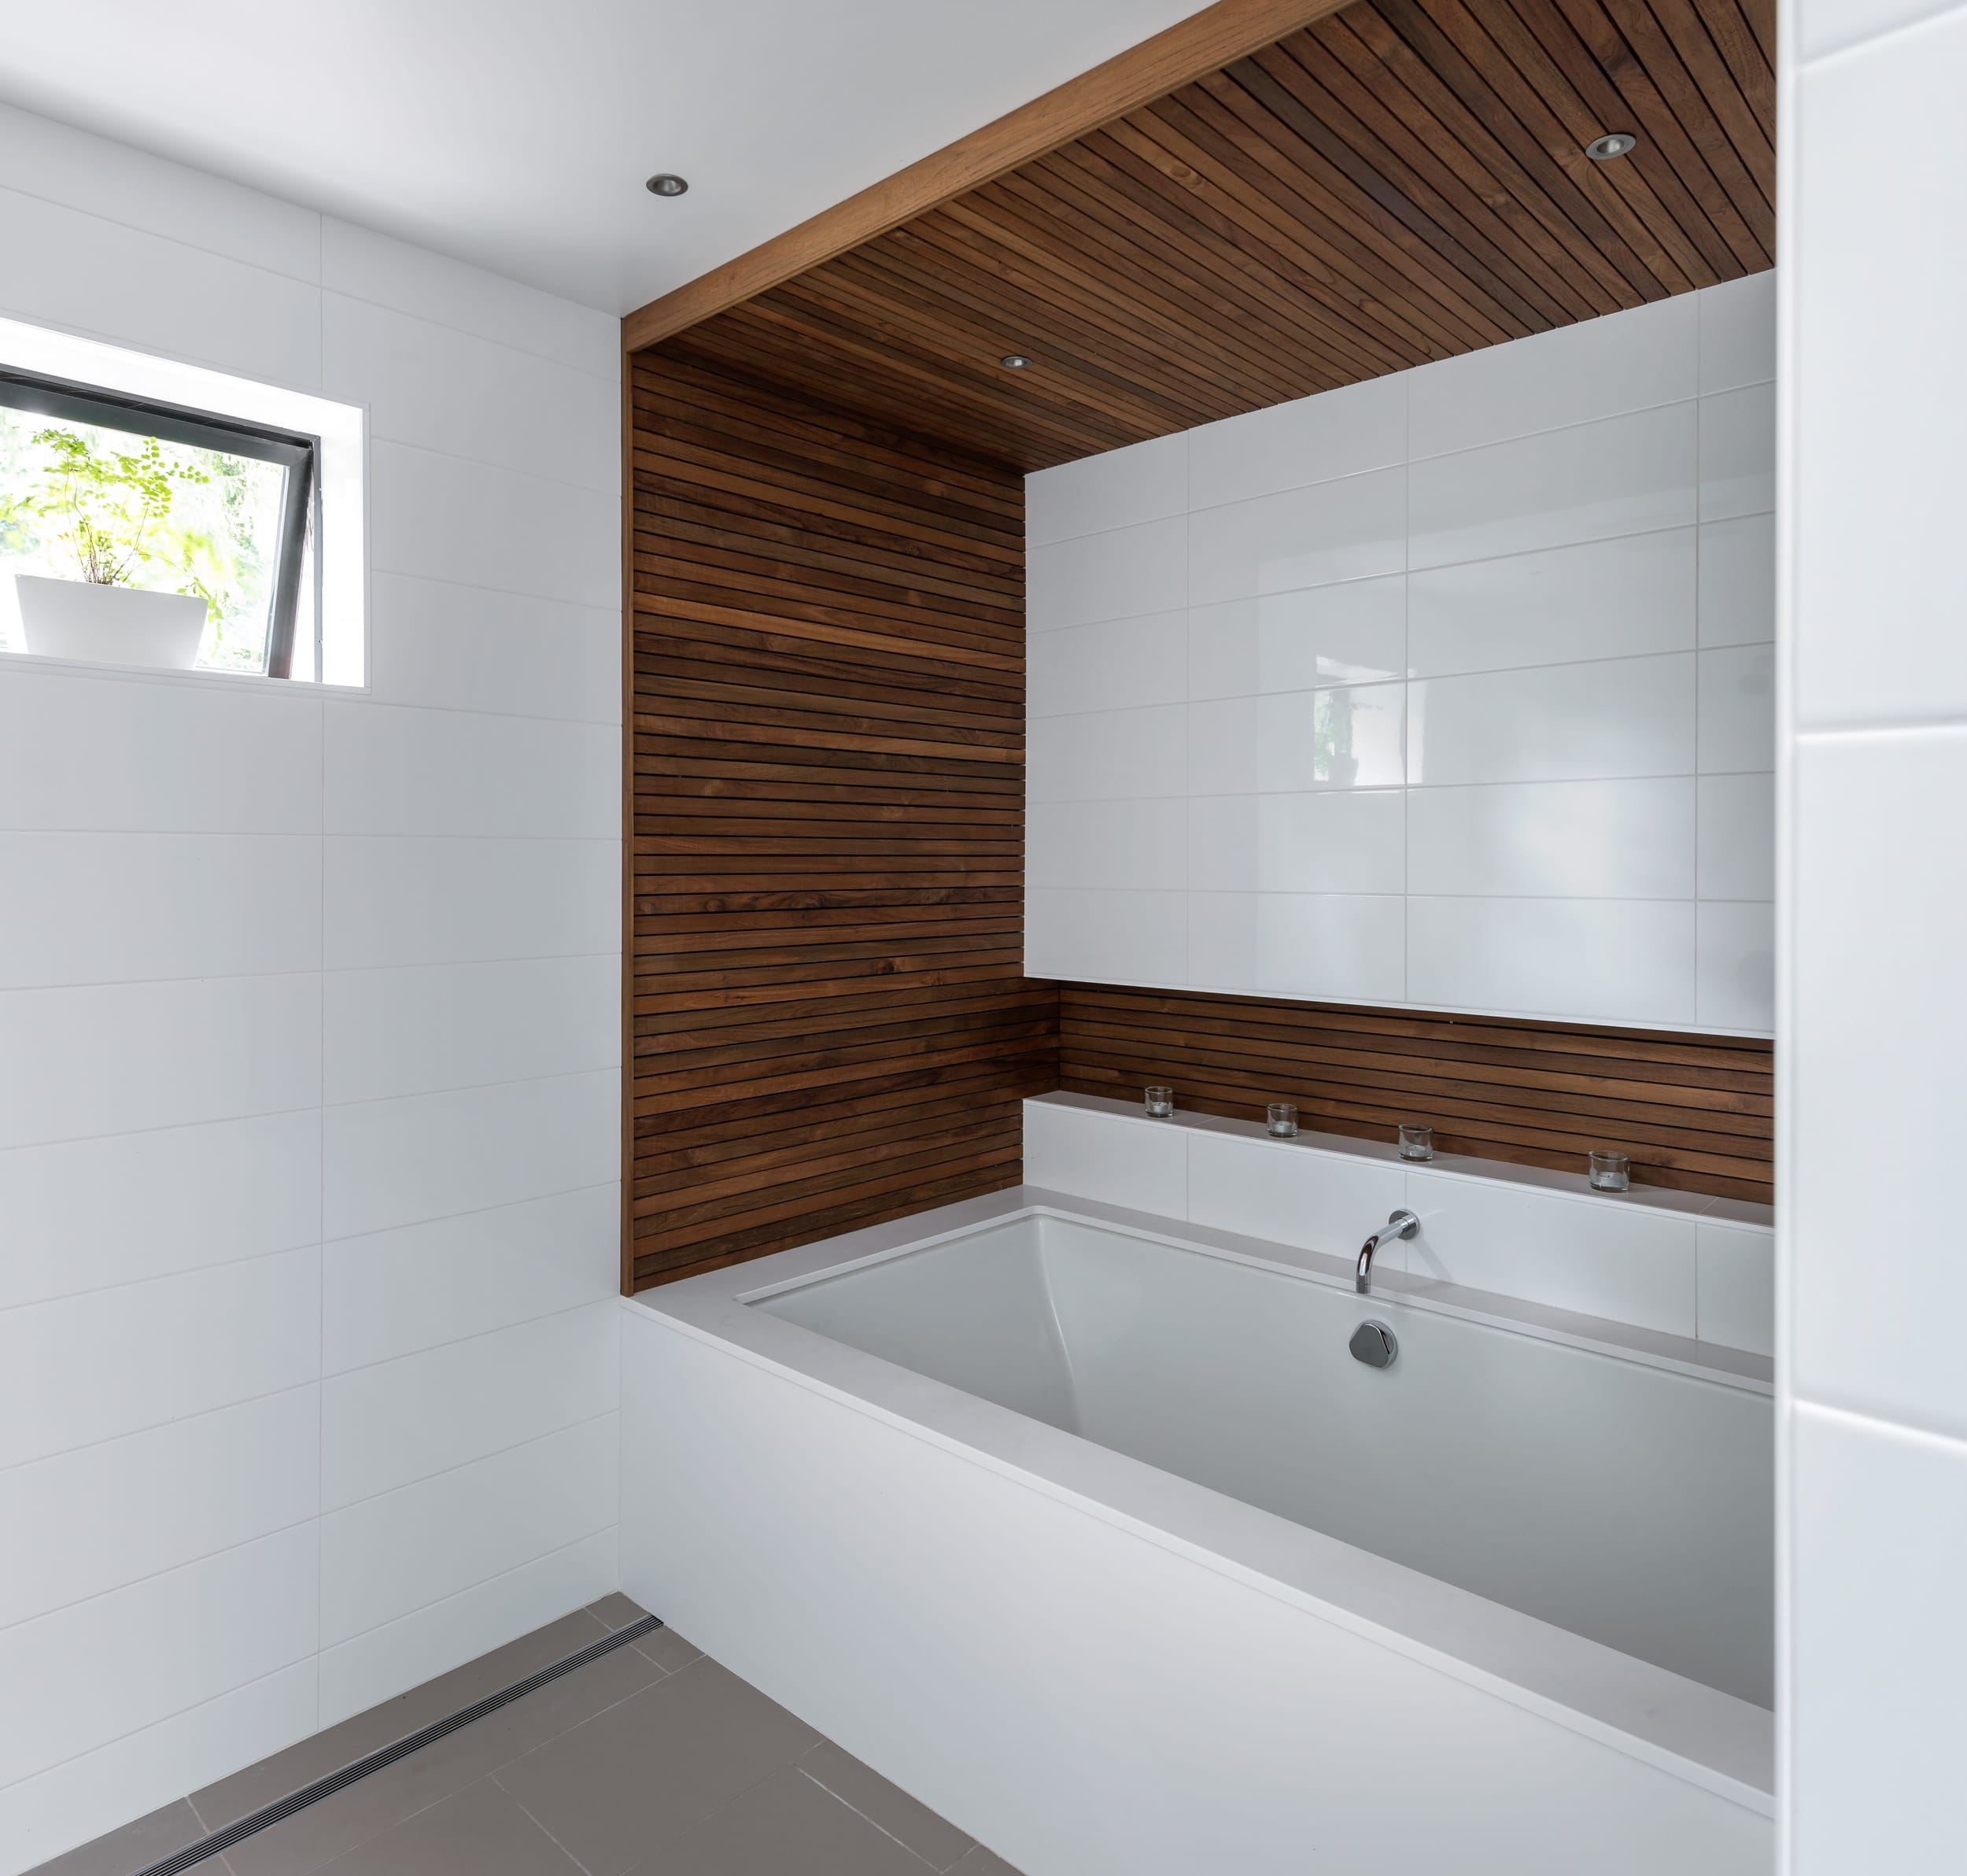 A white bathroom with a wooden ceiling.